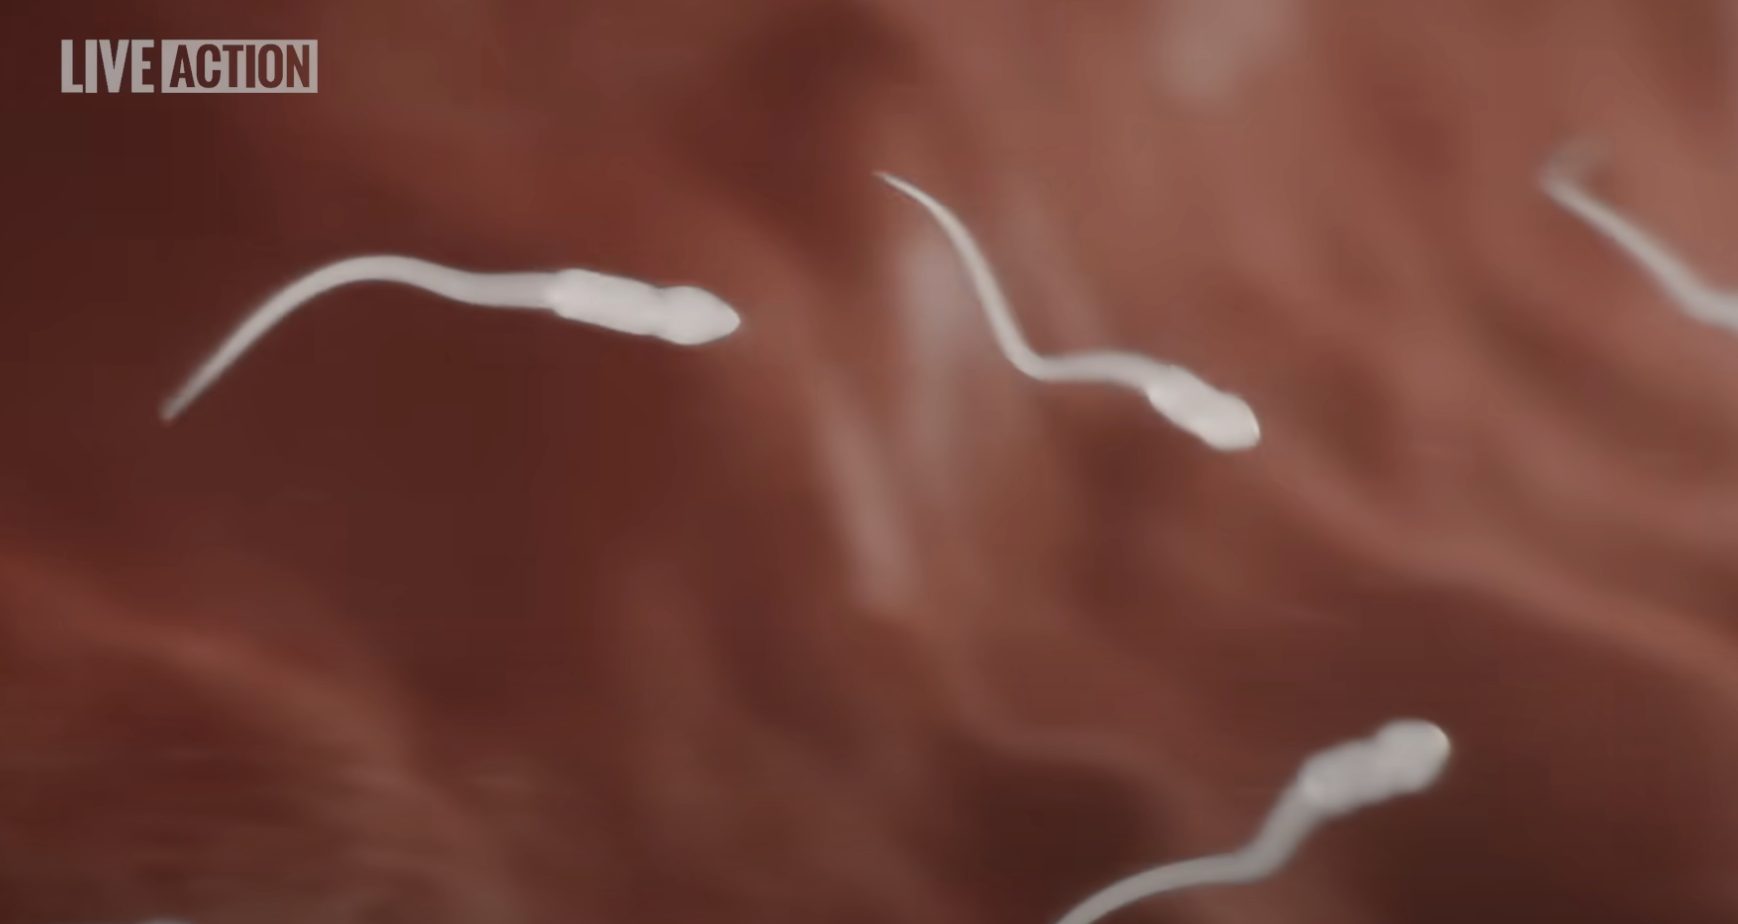 Close-up image shows several sperm cells swimming. The background is blurred, creating a focus on the moving sperm cells. The text reads &quot;LIVE ACTION&quot; in the top left corner